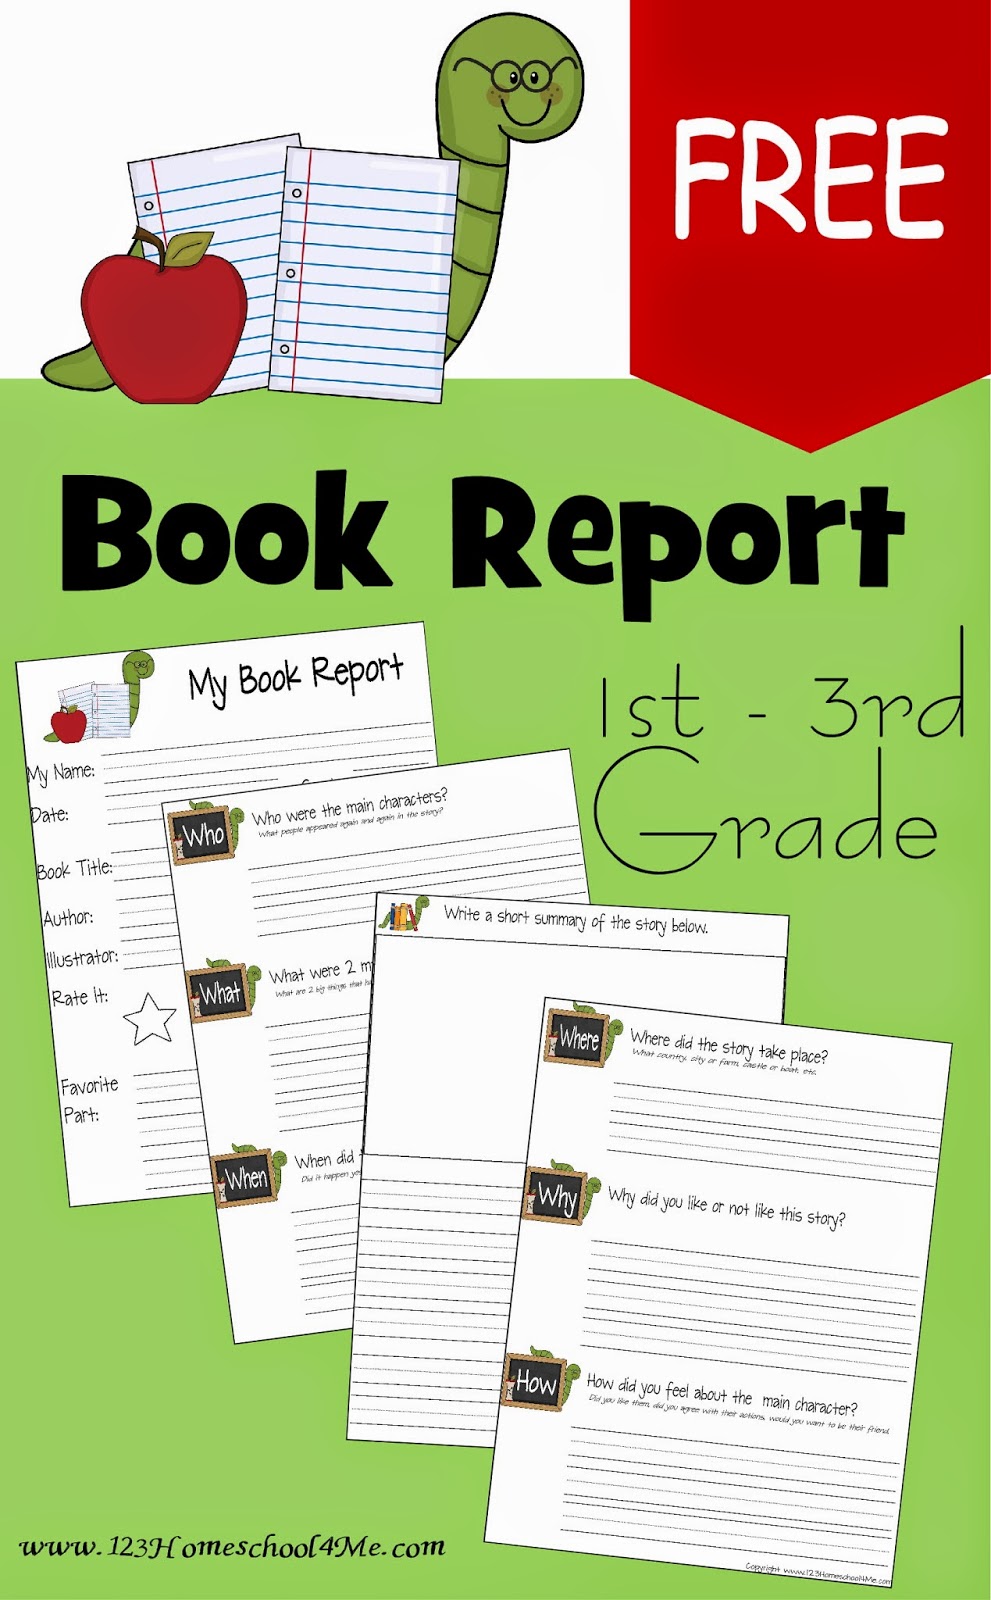 Book report ideas for middle schoolers